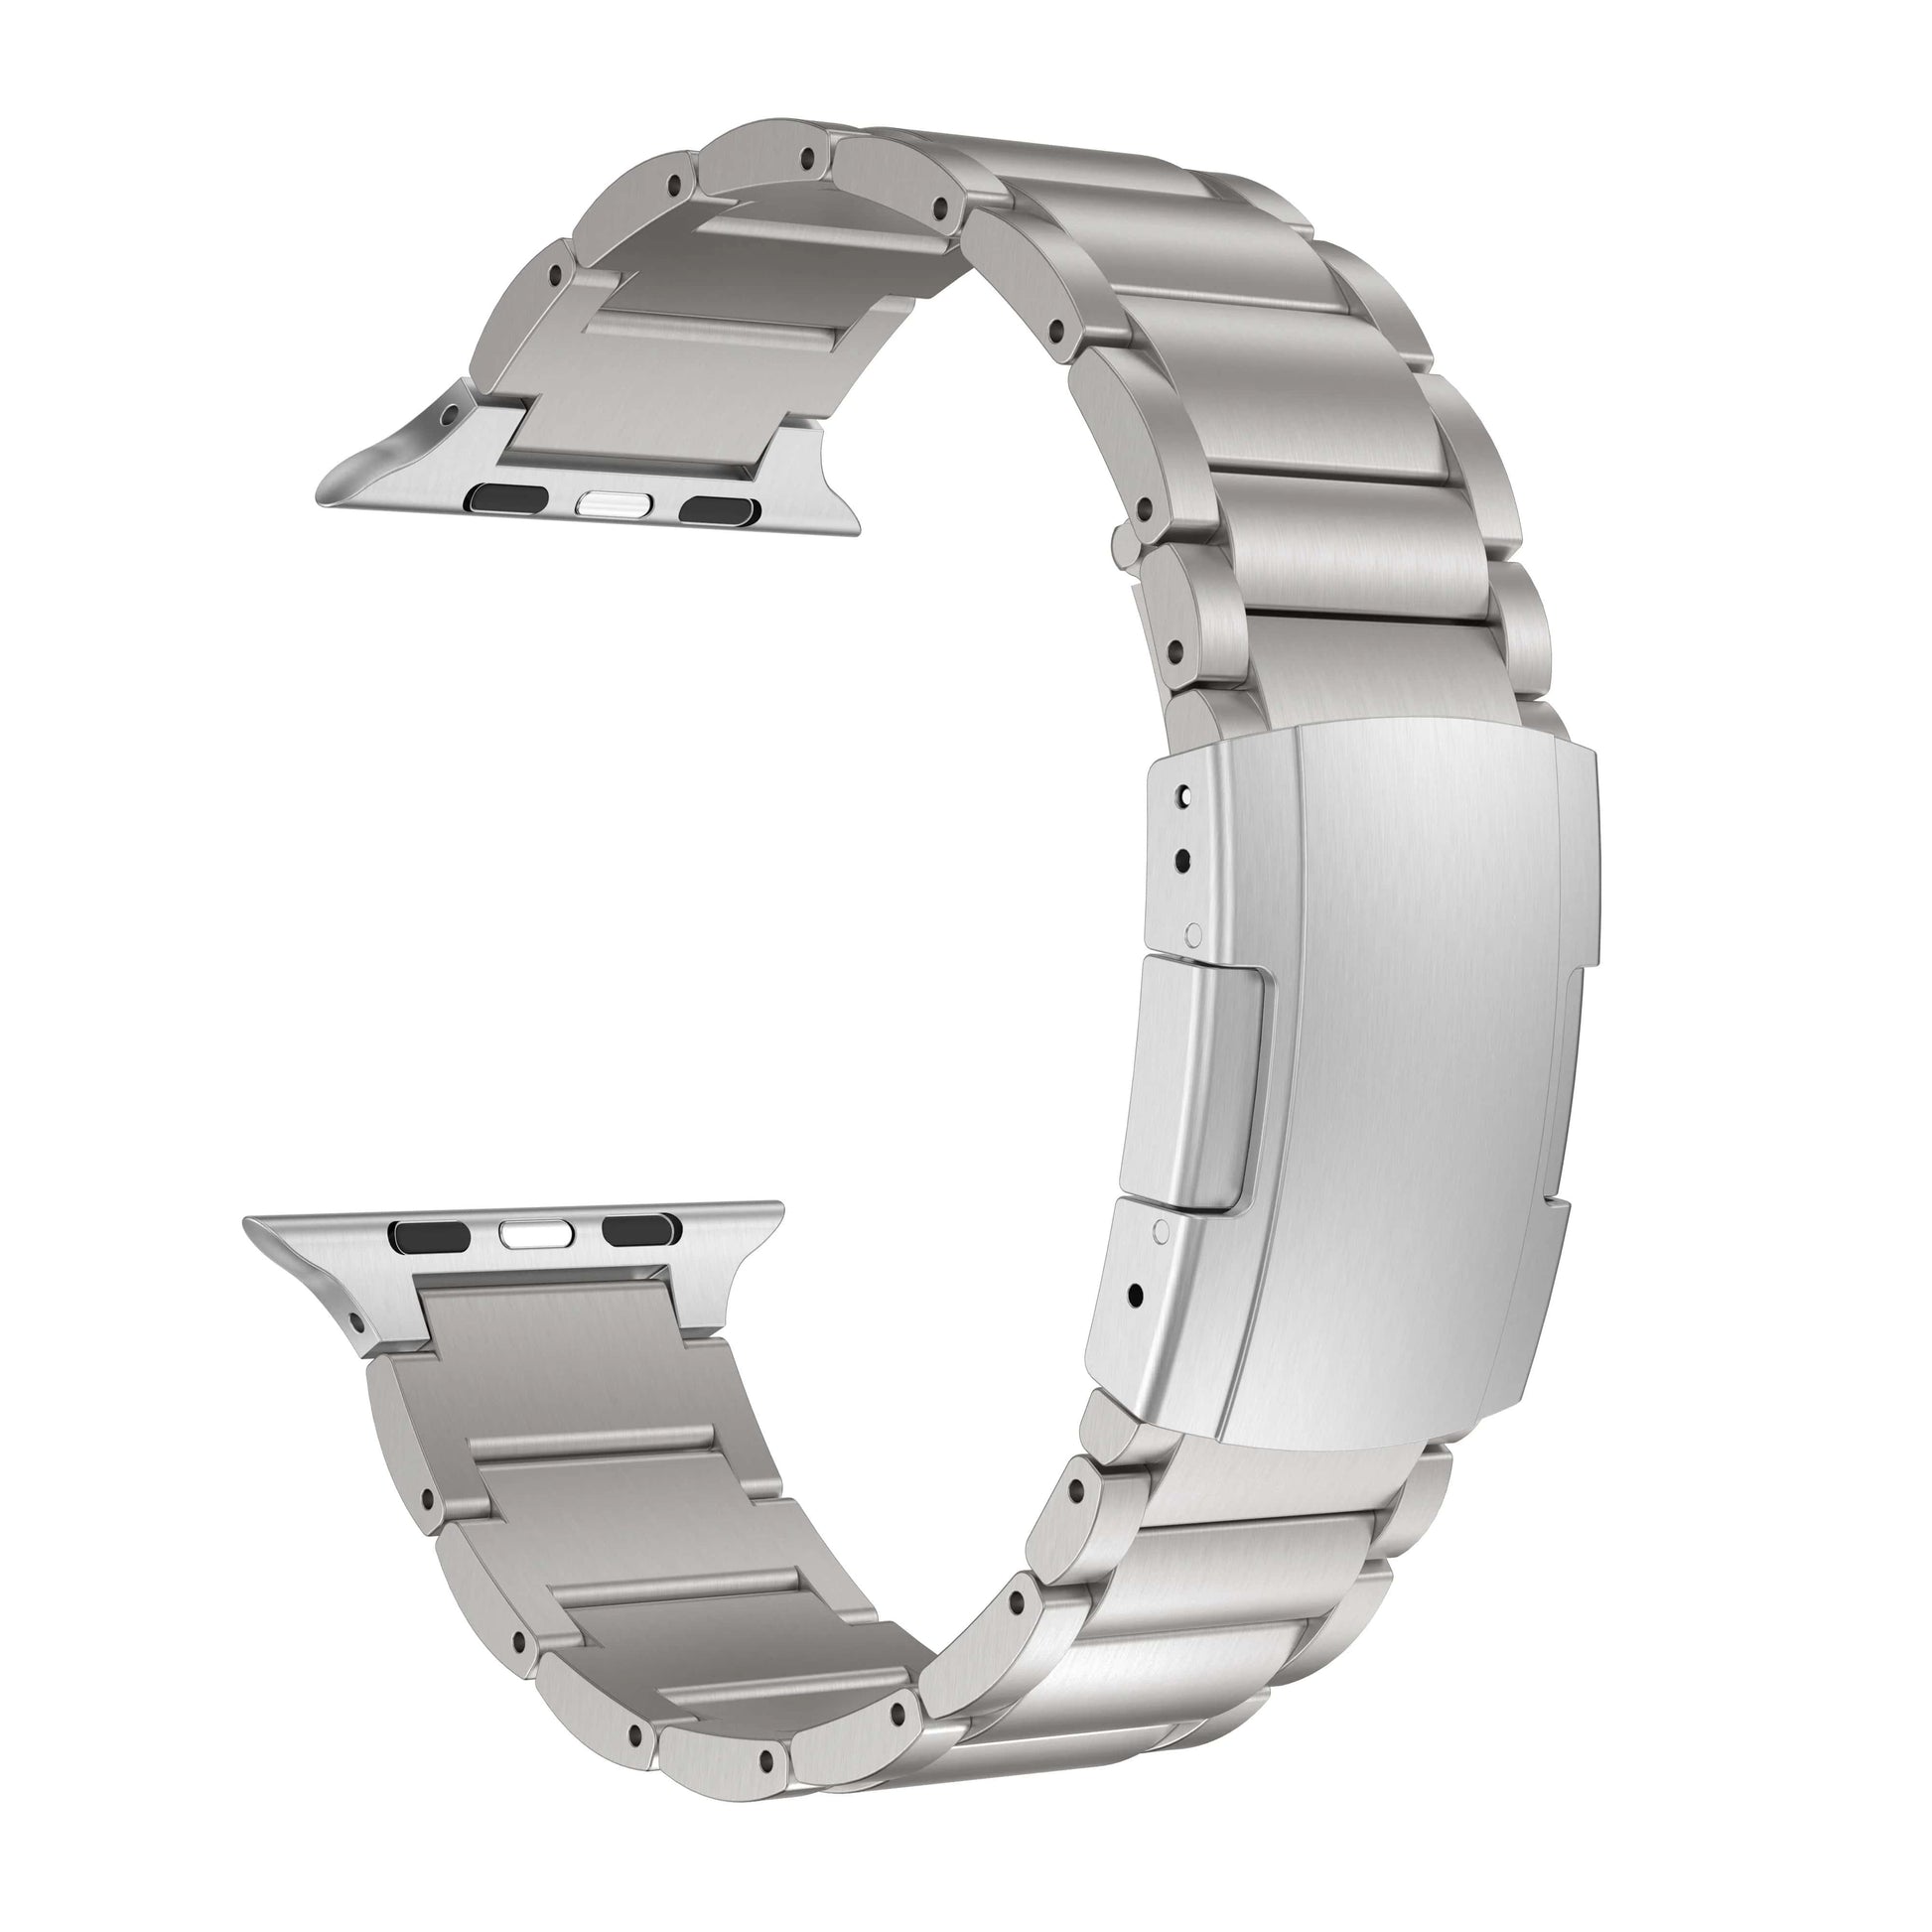 Titanium Apple Watch Band Separated From Apple Watch